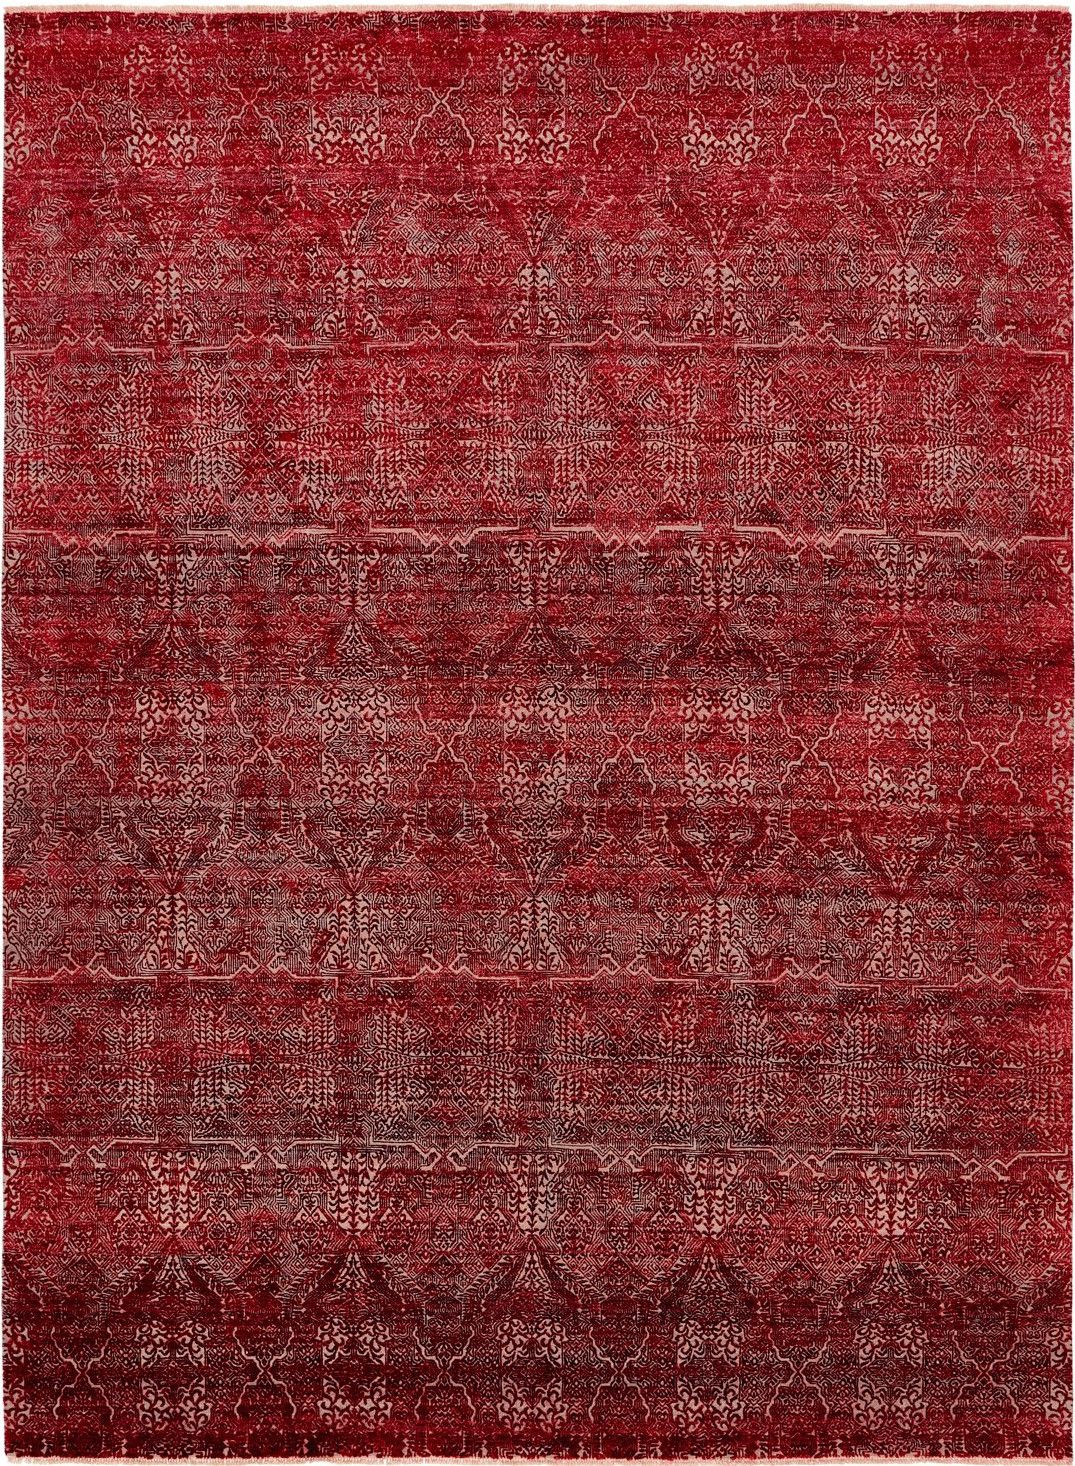 Red Rugs Runners And Area, Red Runner Rugs